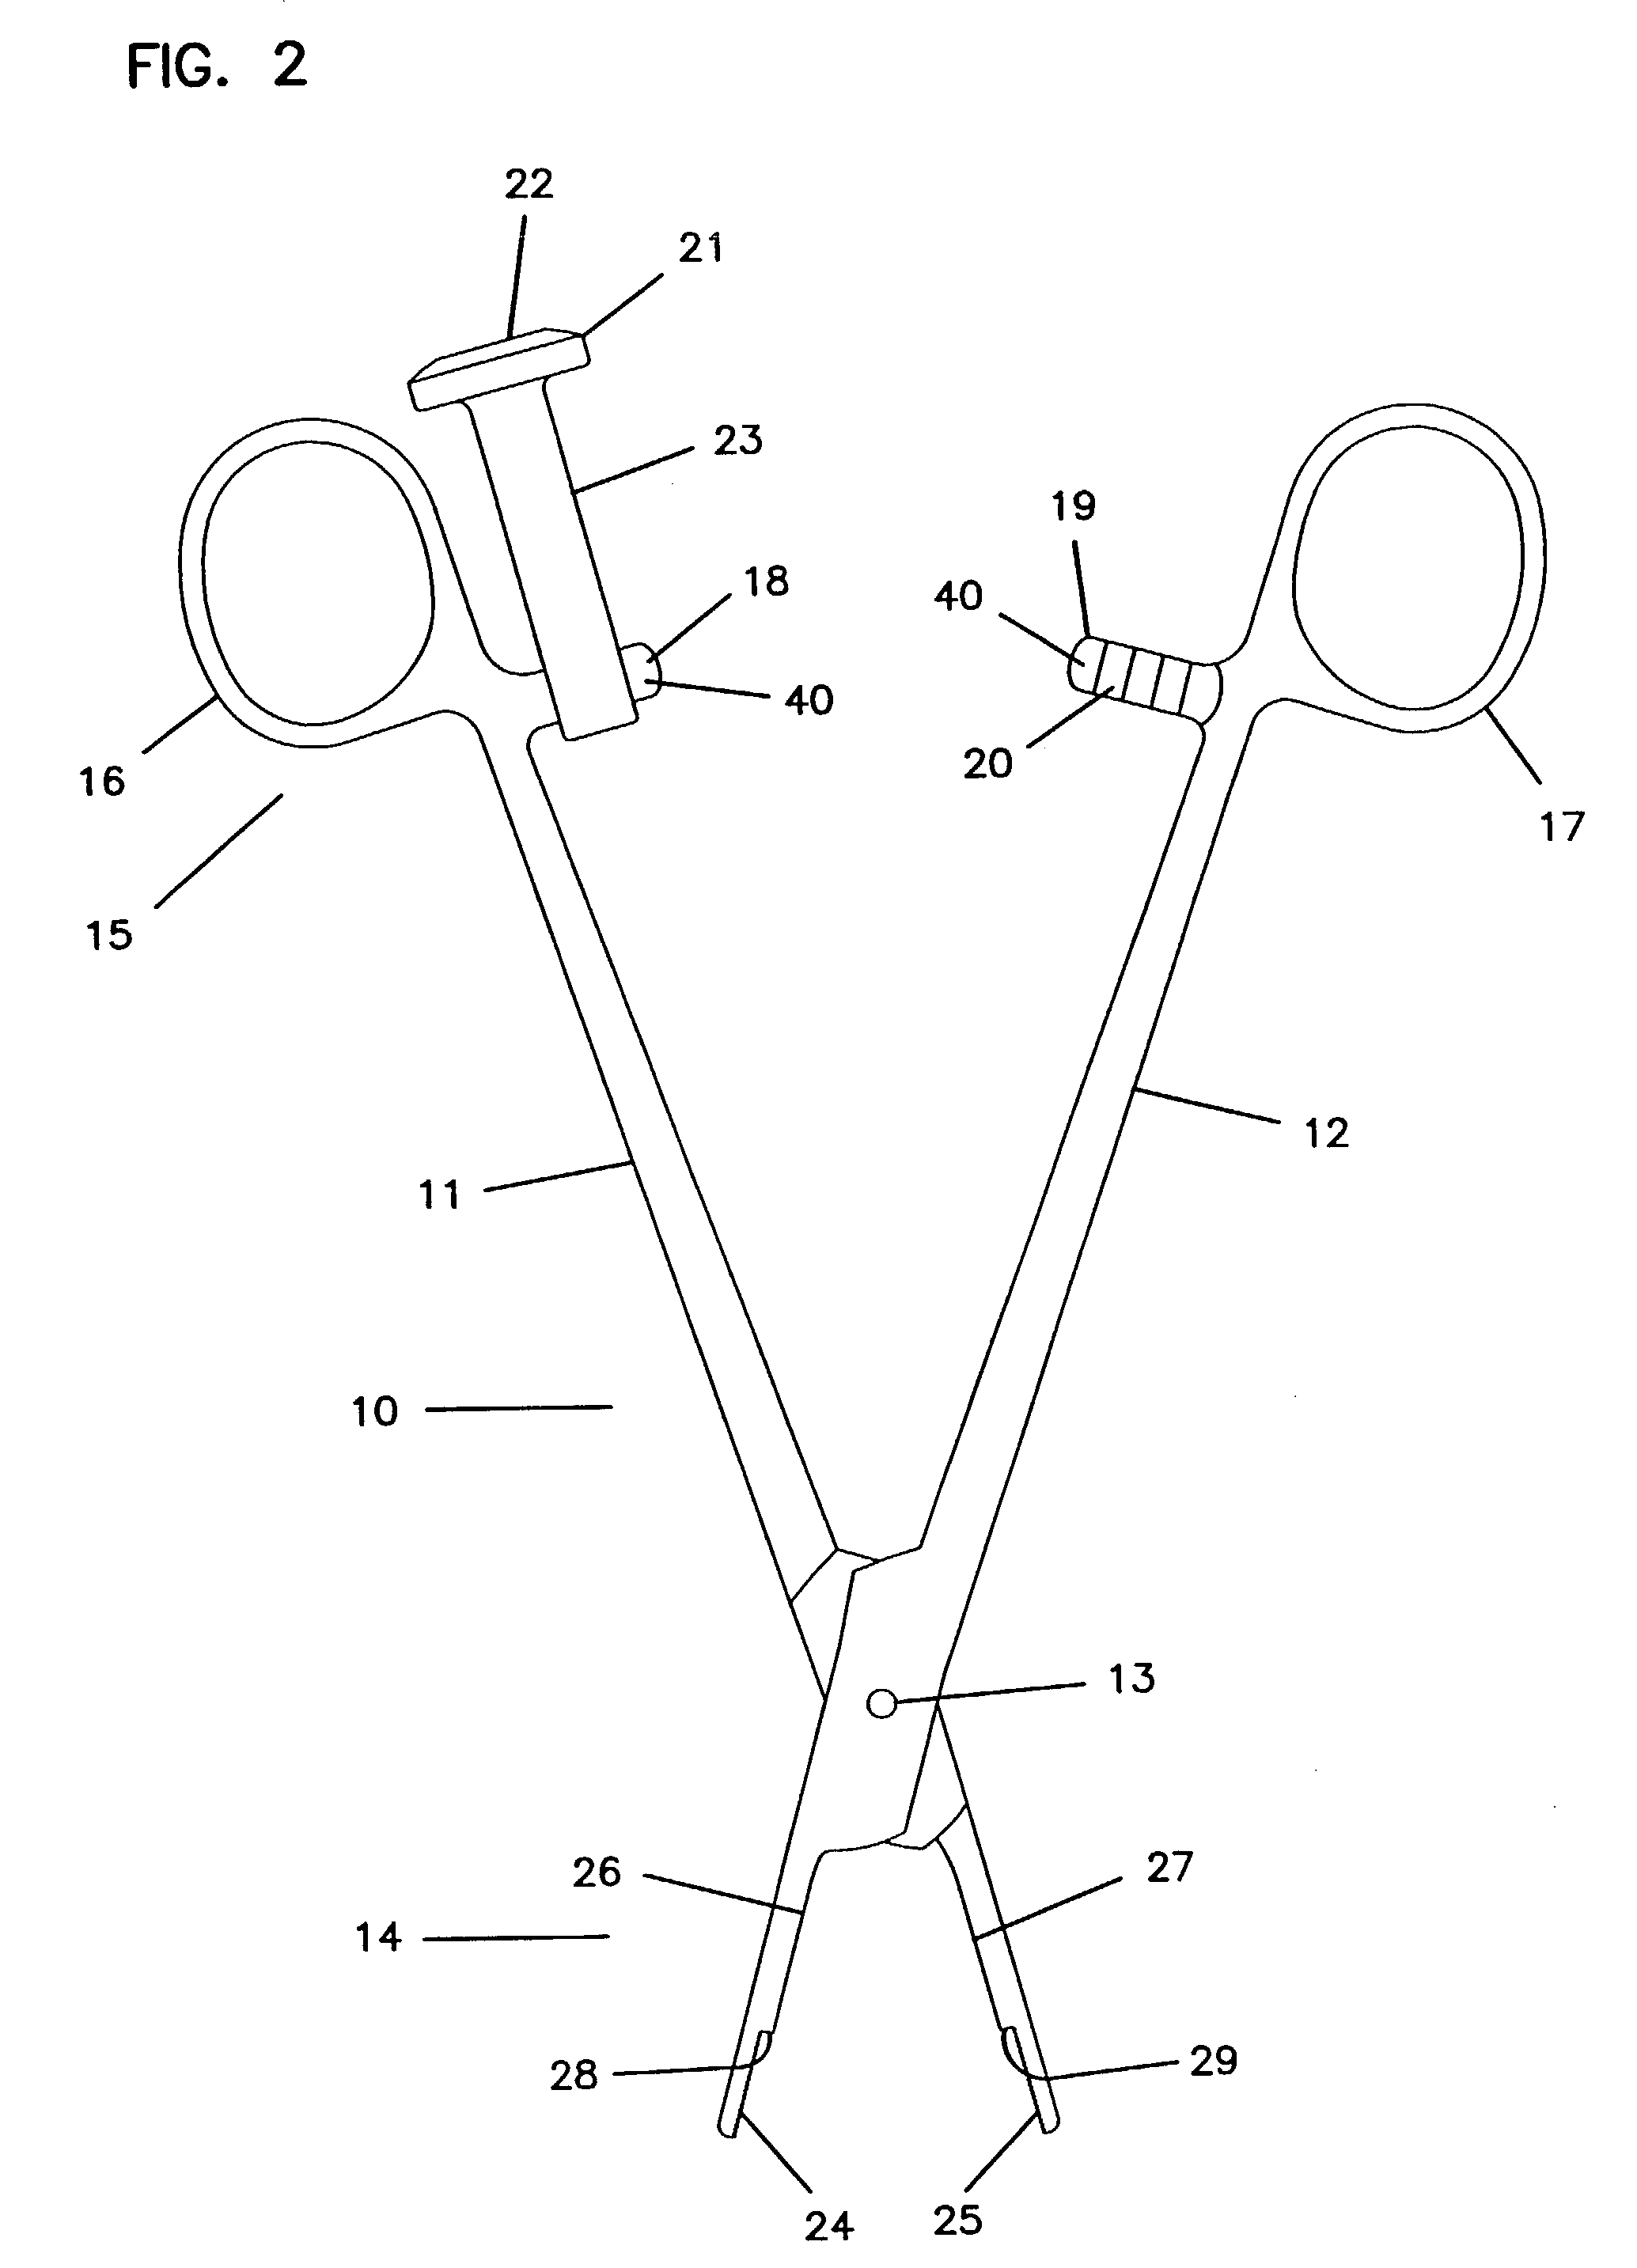 Surgical implant instrument and method